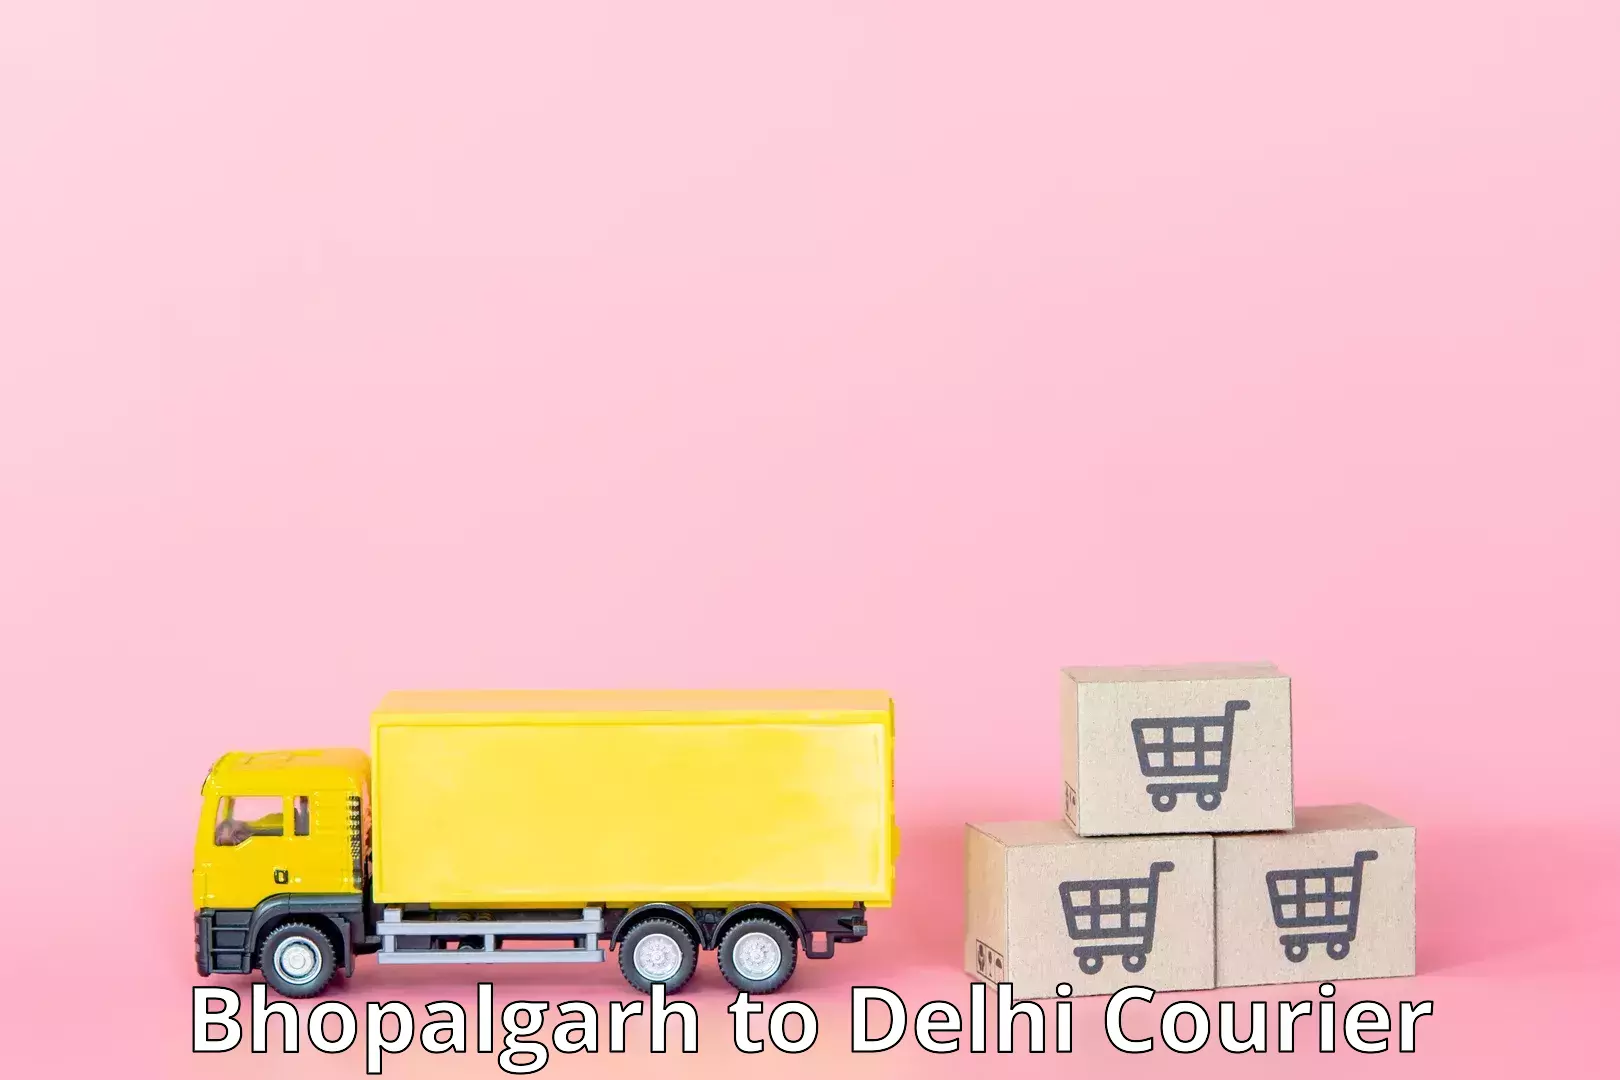 End-to-end delivery Bhopalgarh to East Delhi